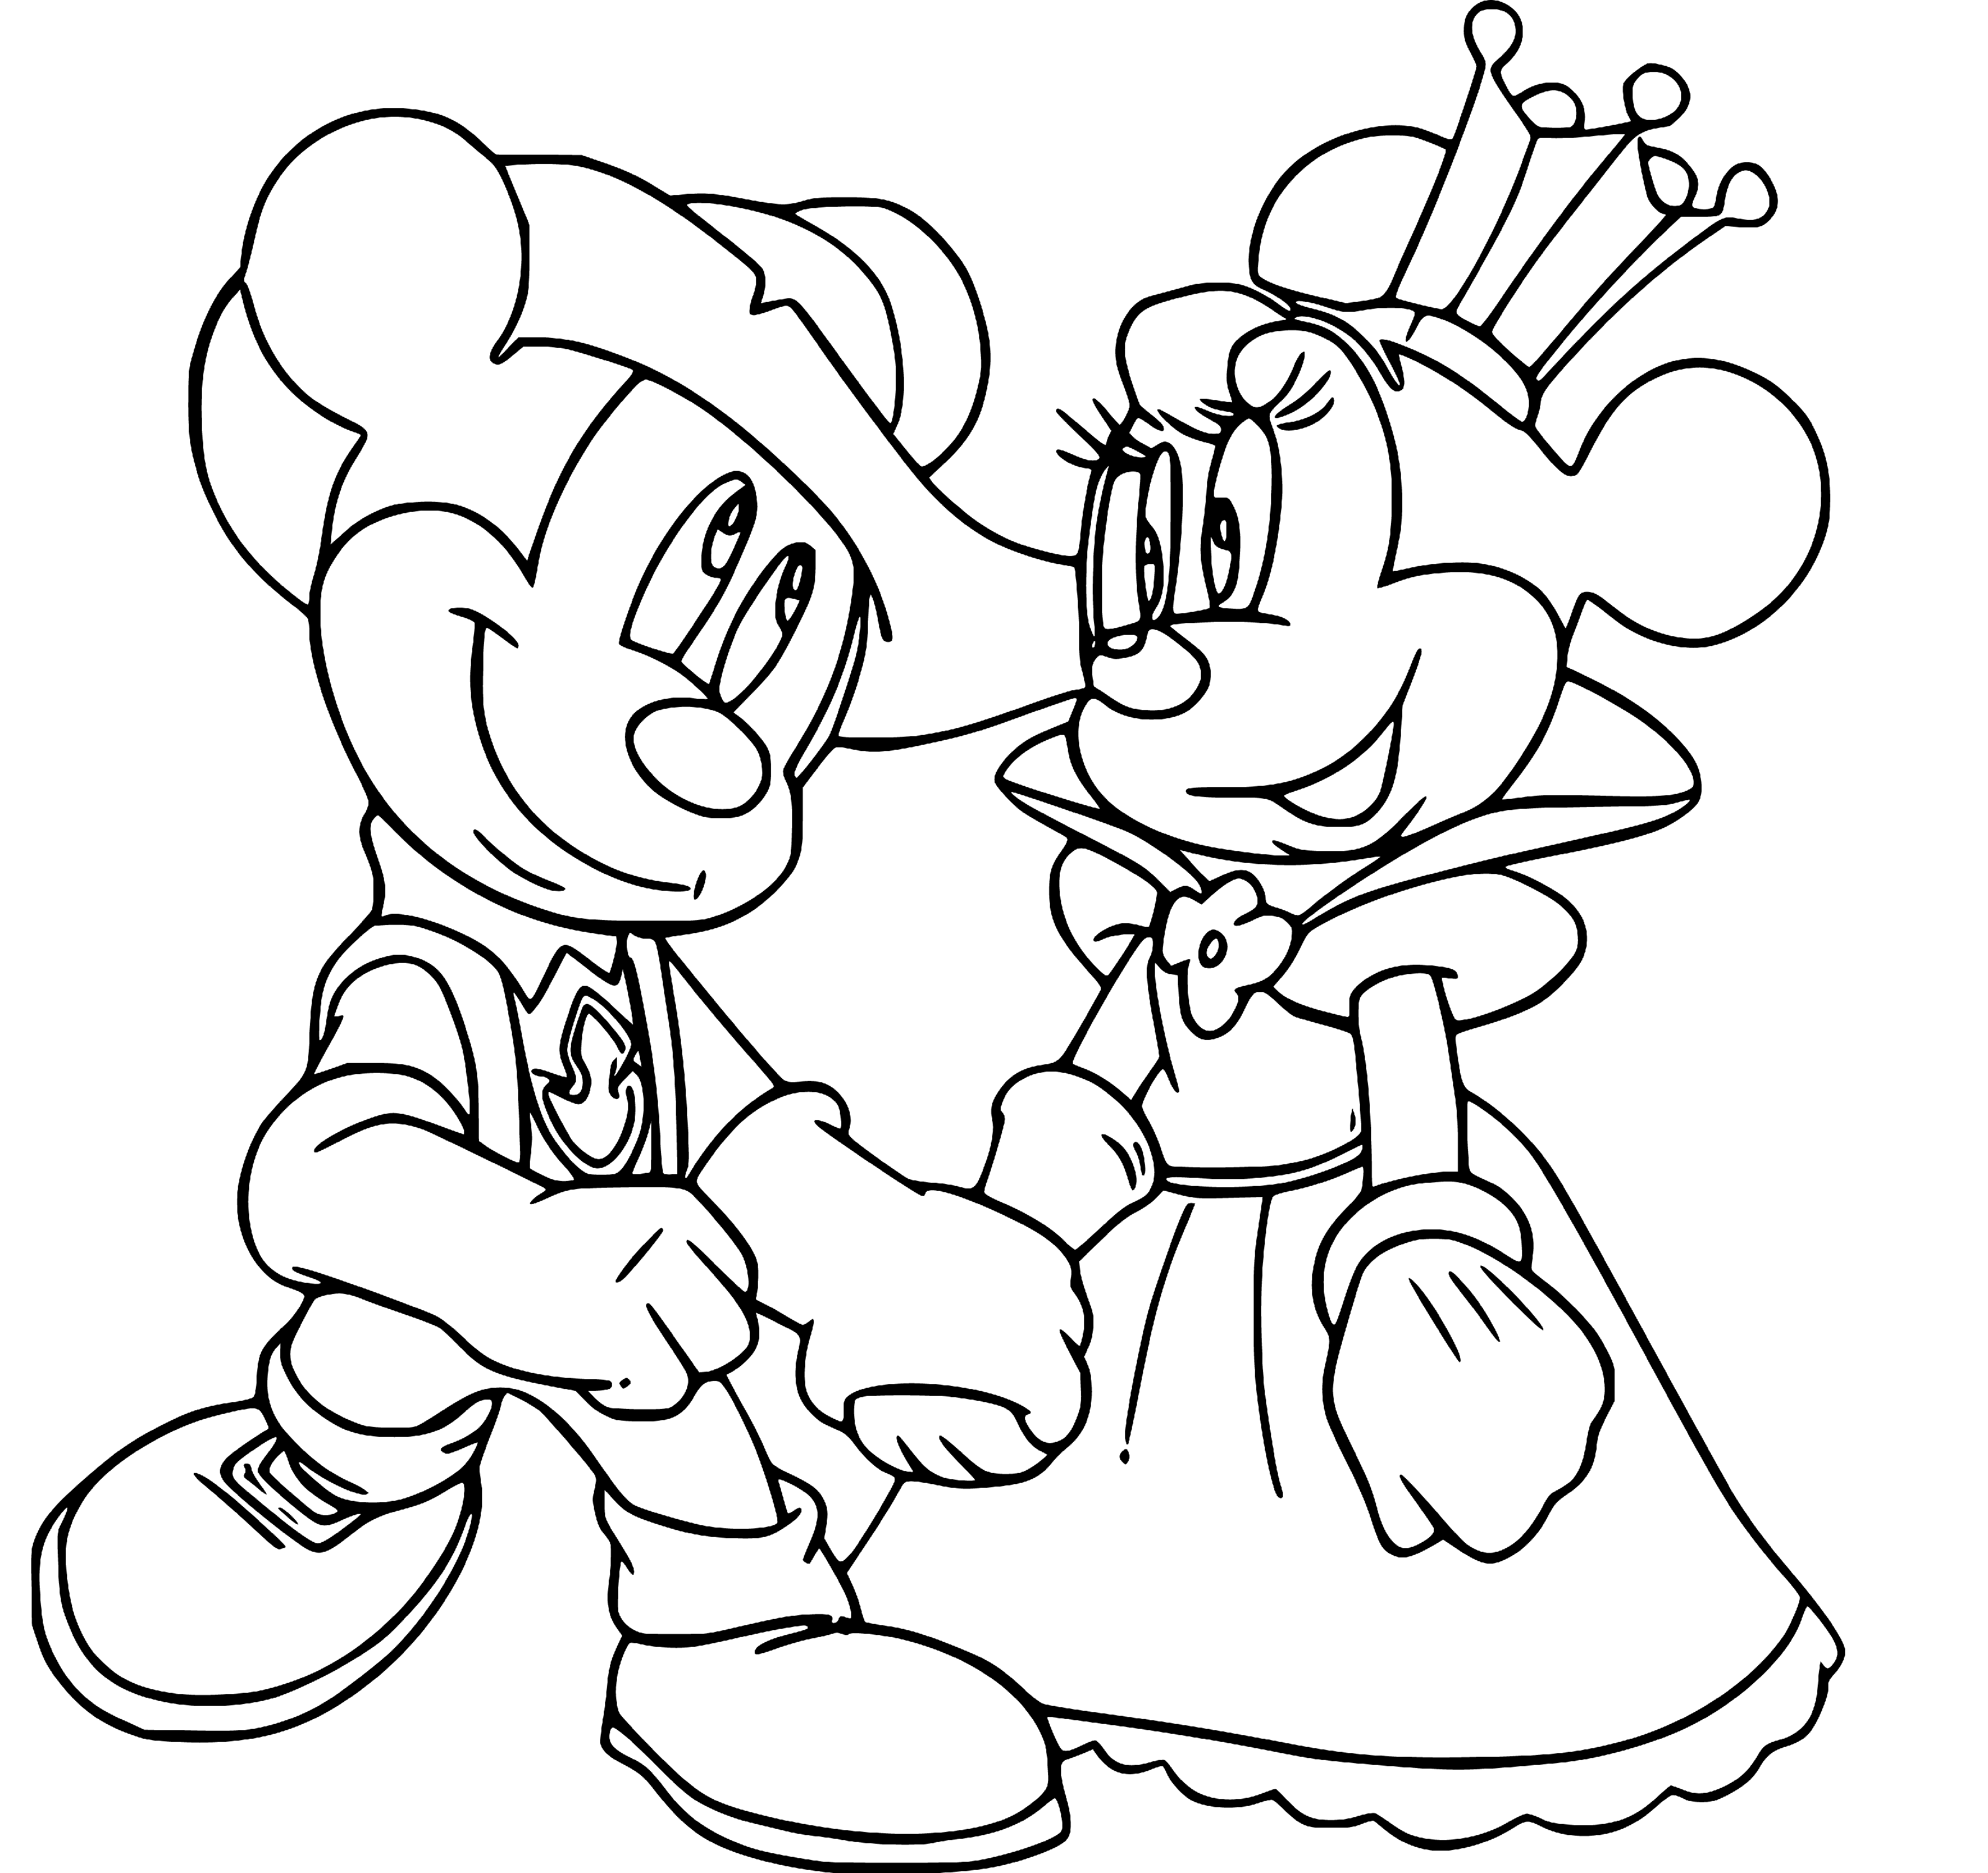 Simple Mickey Mouse and Minnie Mouse (Disney) Coloring Page - SheetalColor.com